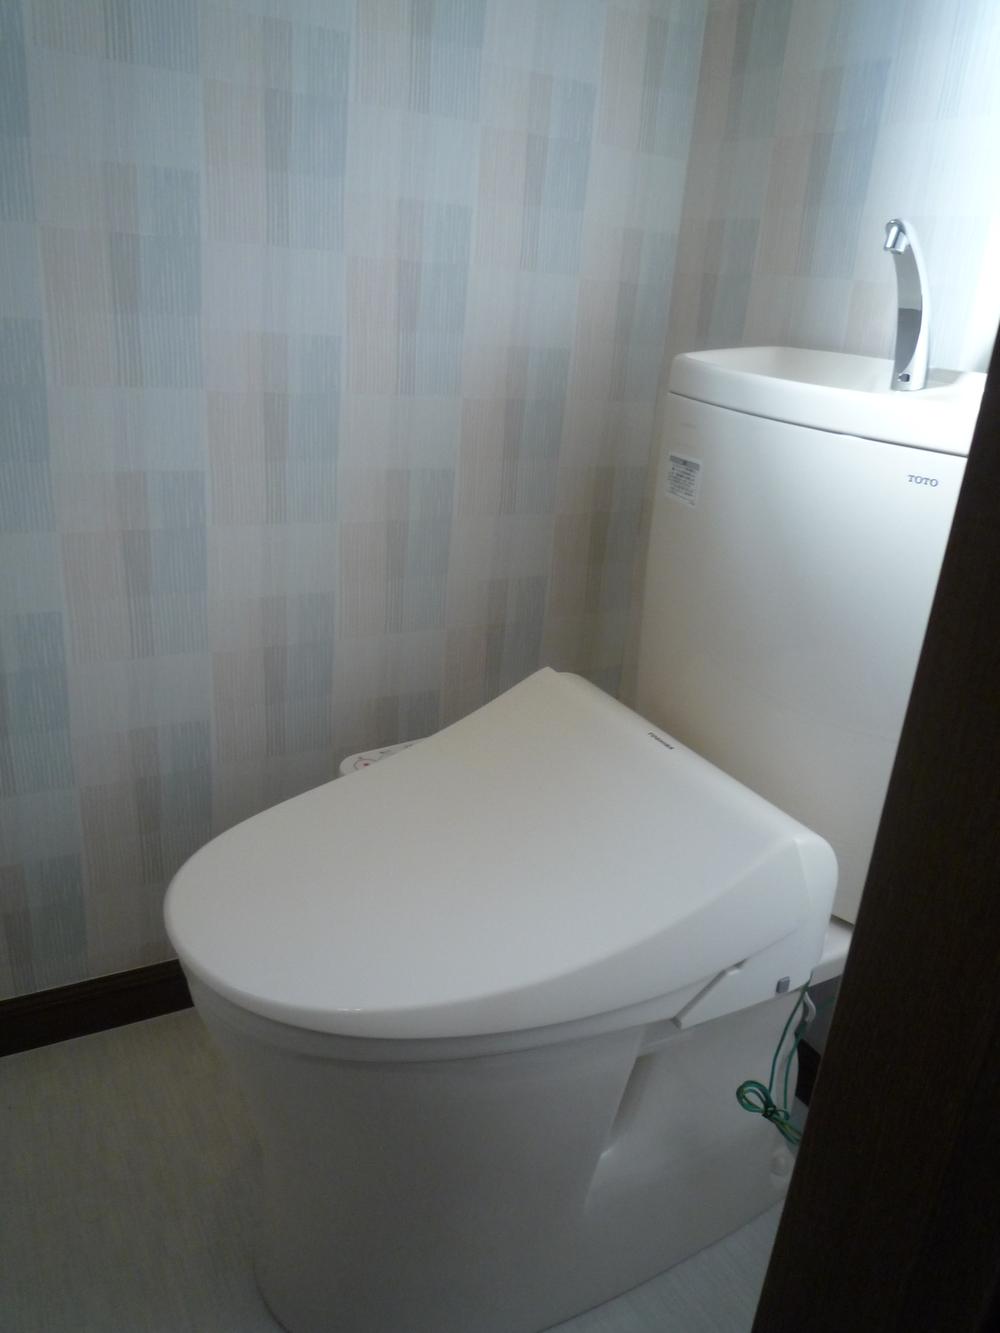 Toilet. It renewed the first floor of the toilet. Deodorizing with warm water toilet seat was also exchange.